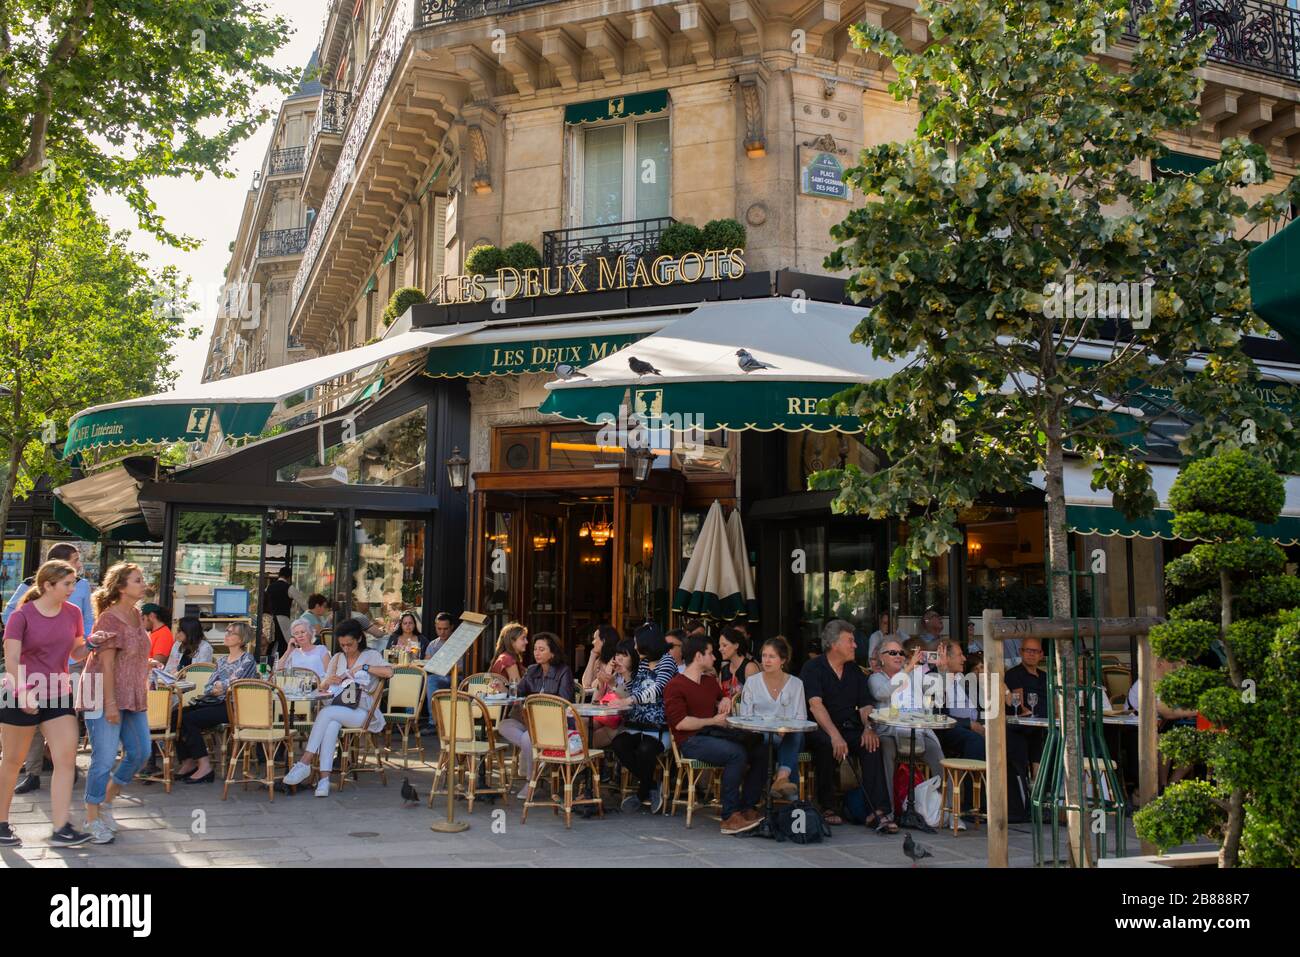 The famous cafe Les Deux magots located in parisian Saint Germain des Pres area;  sunny summer day in Paris. People sitting in the french cafe outside Stock Photo